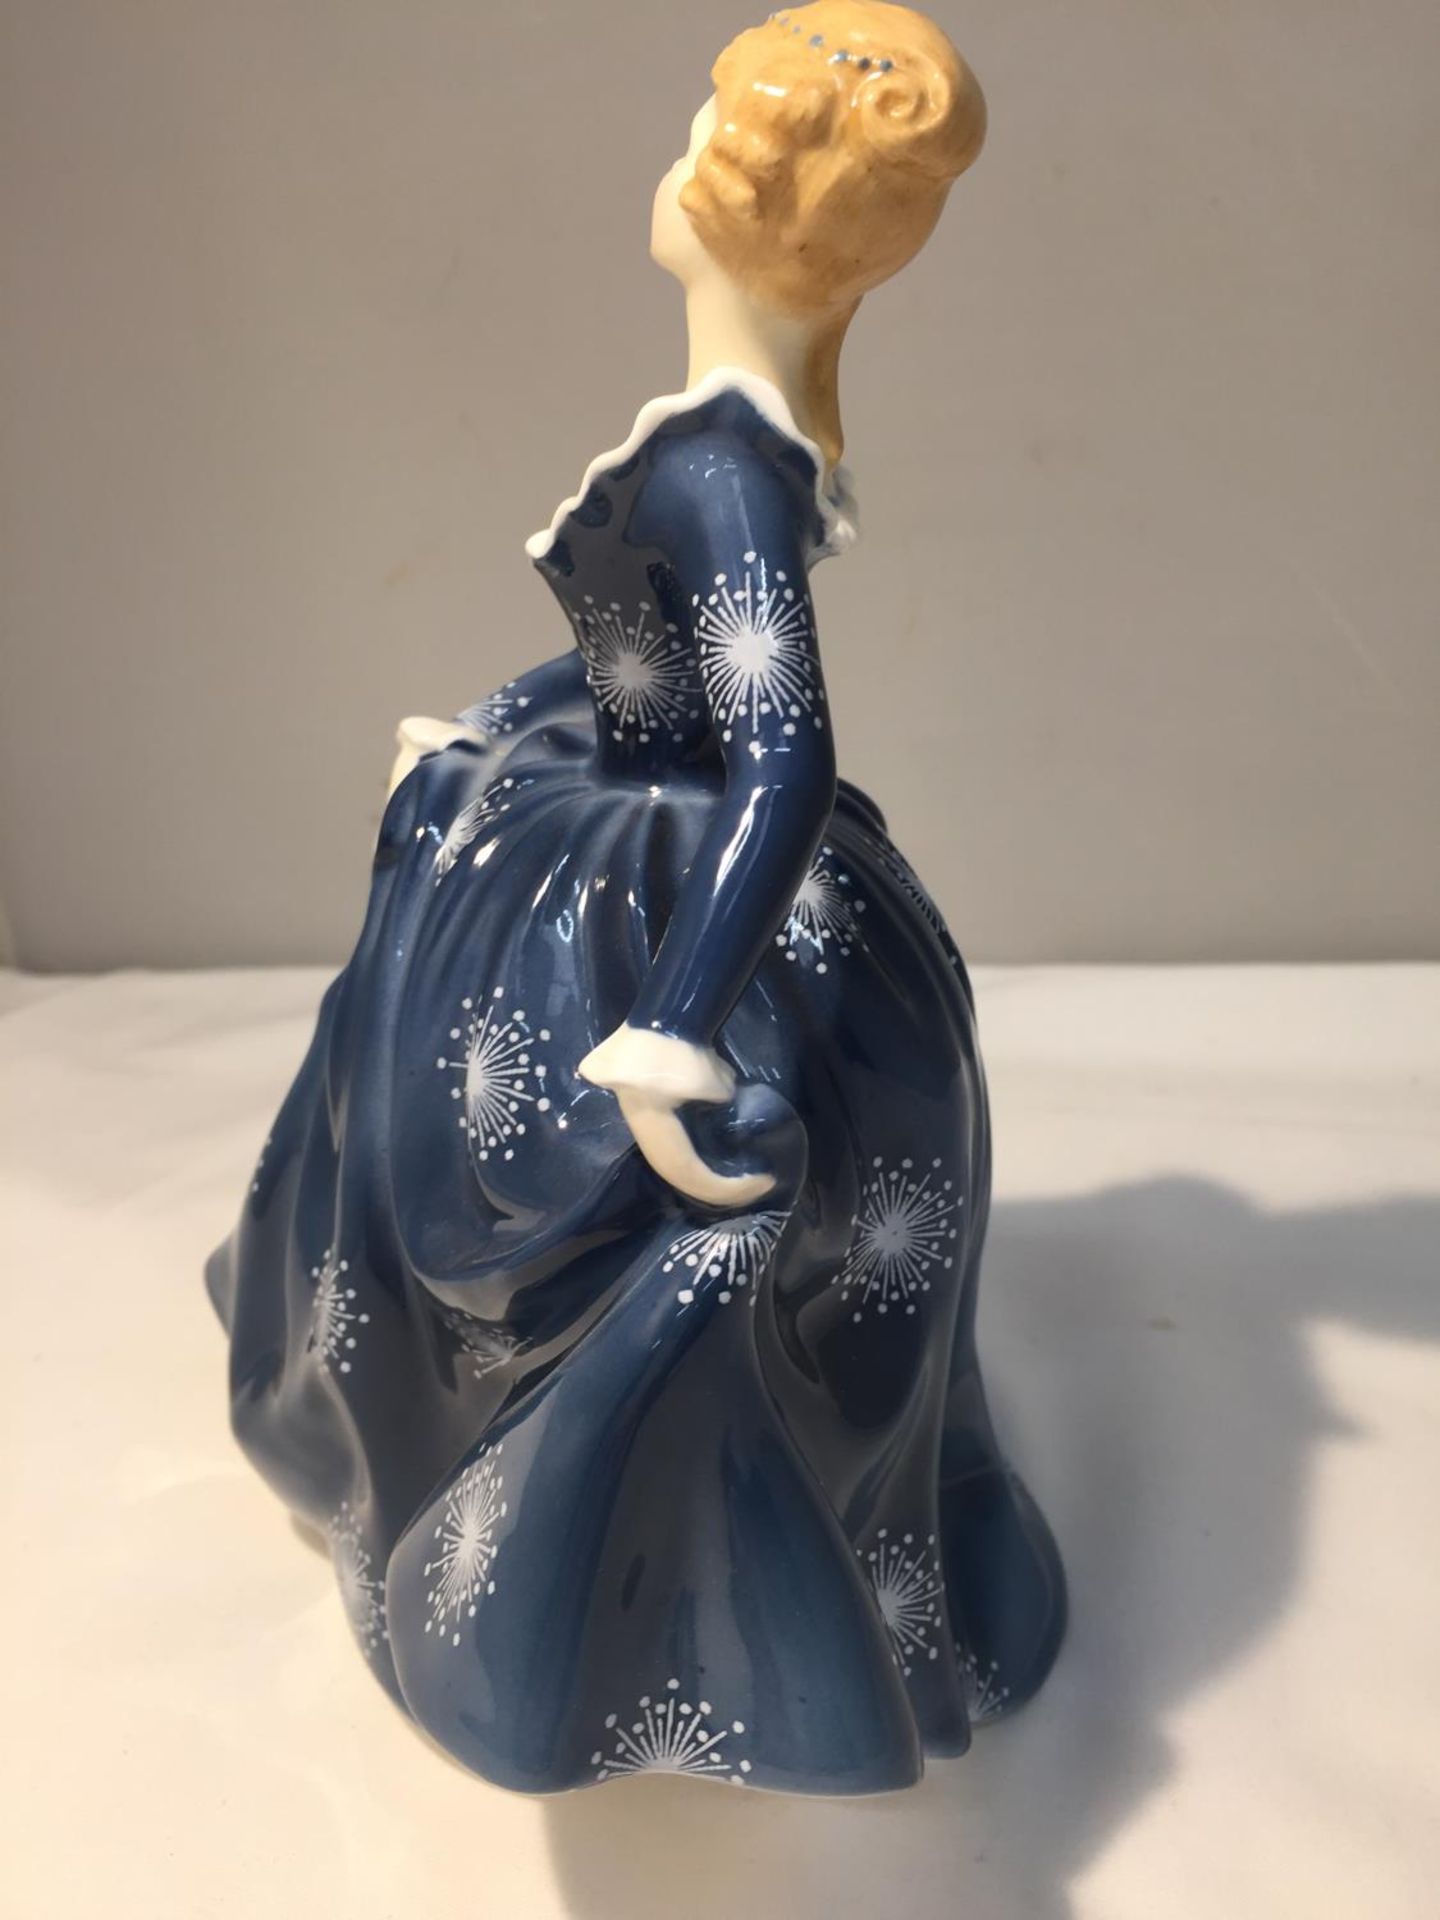 A ROYAL DOULTON FIGURE FRAGRANCE HN 2334 HEIGHT 21CM - Image 2 of 7